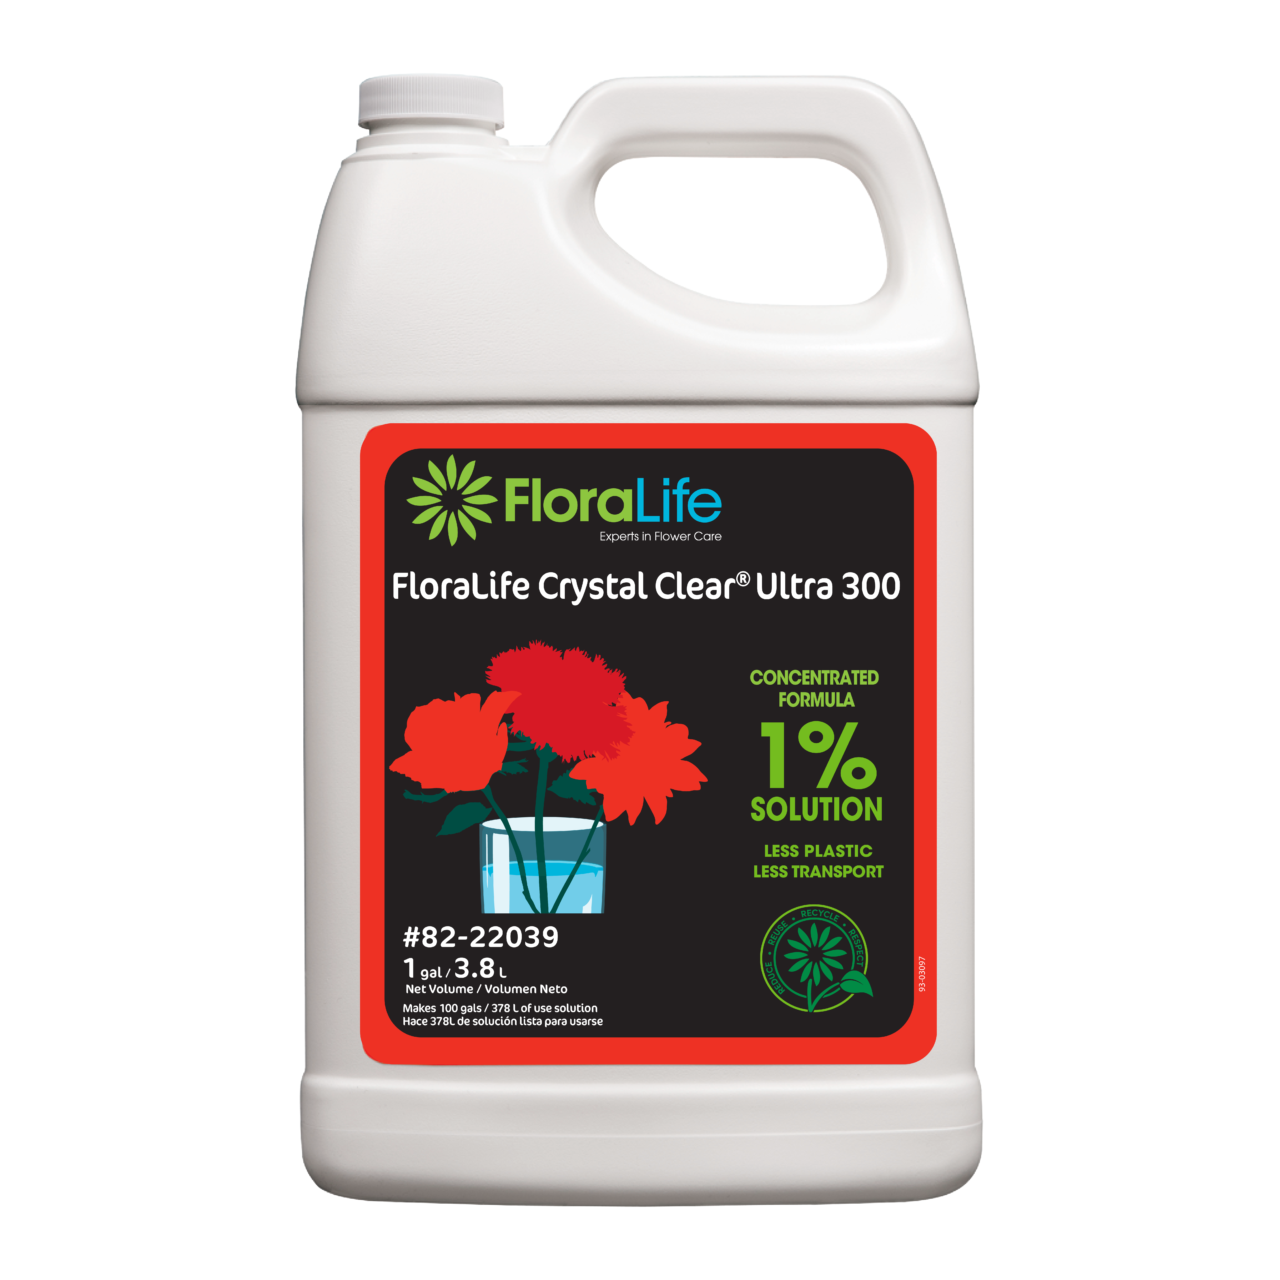 FloraLife Crystal Clear® Ultra